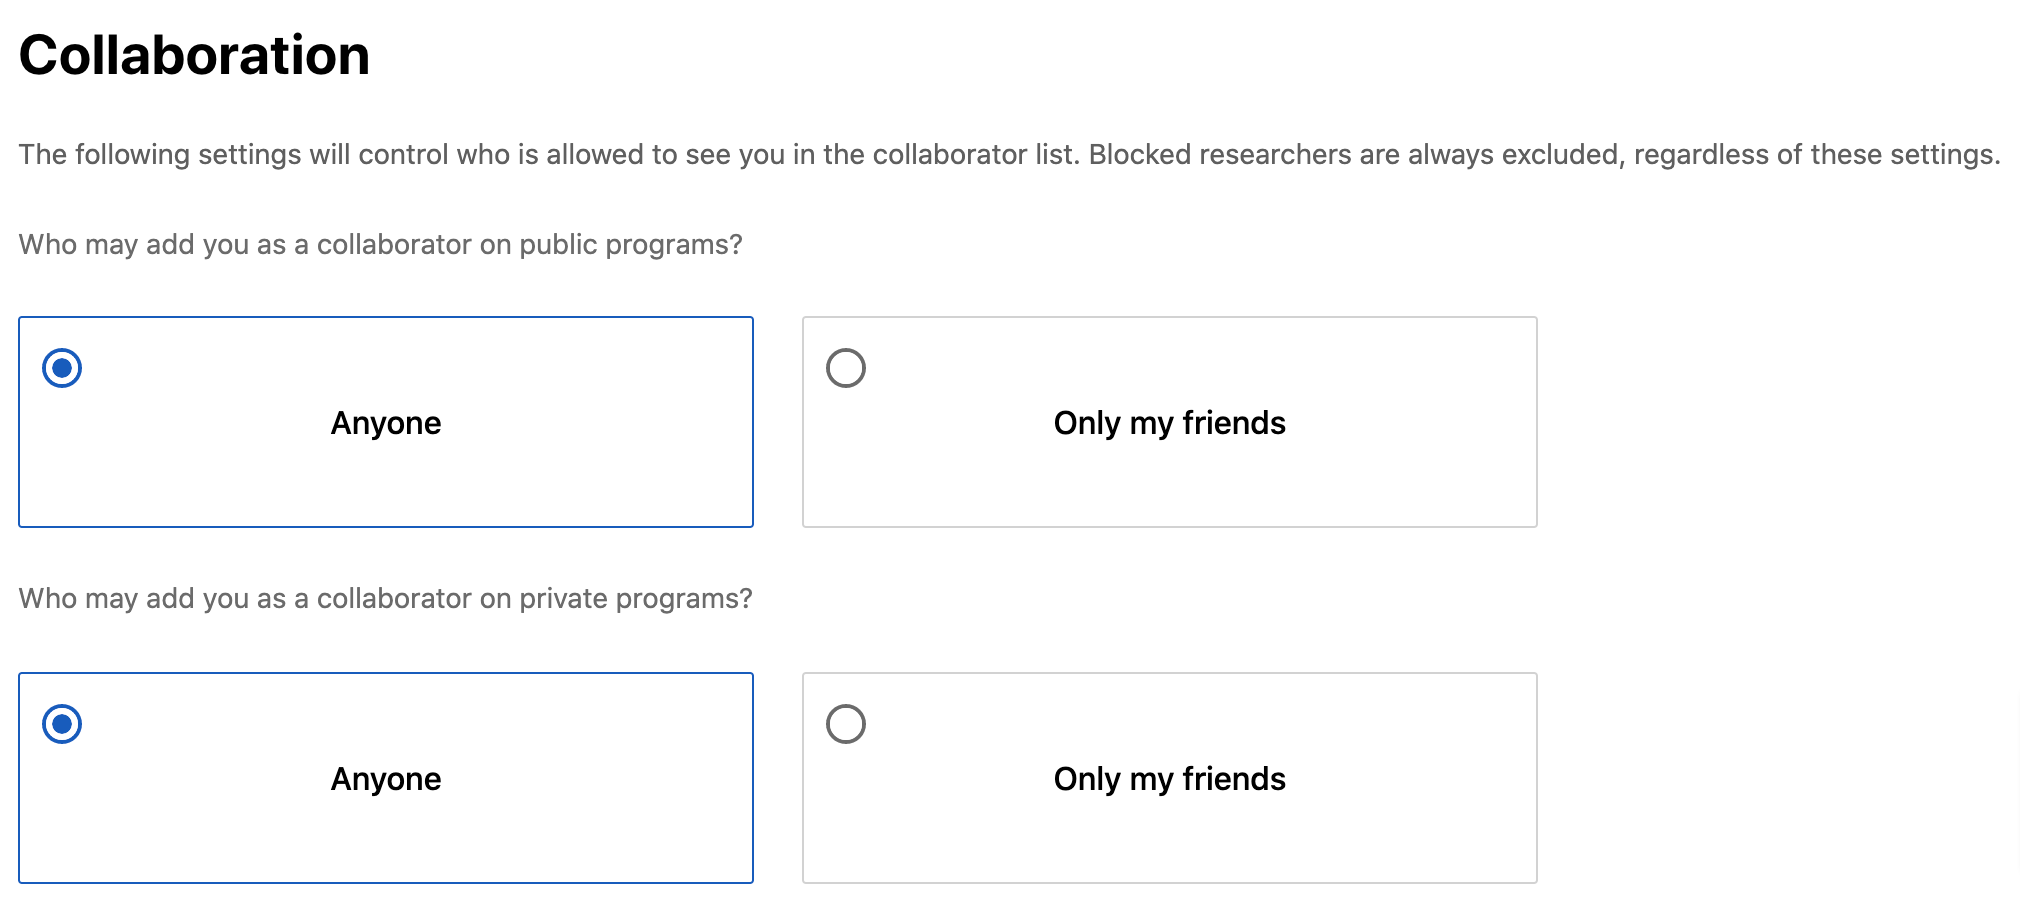 Select who can add you as a collaborator for public and private programs